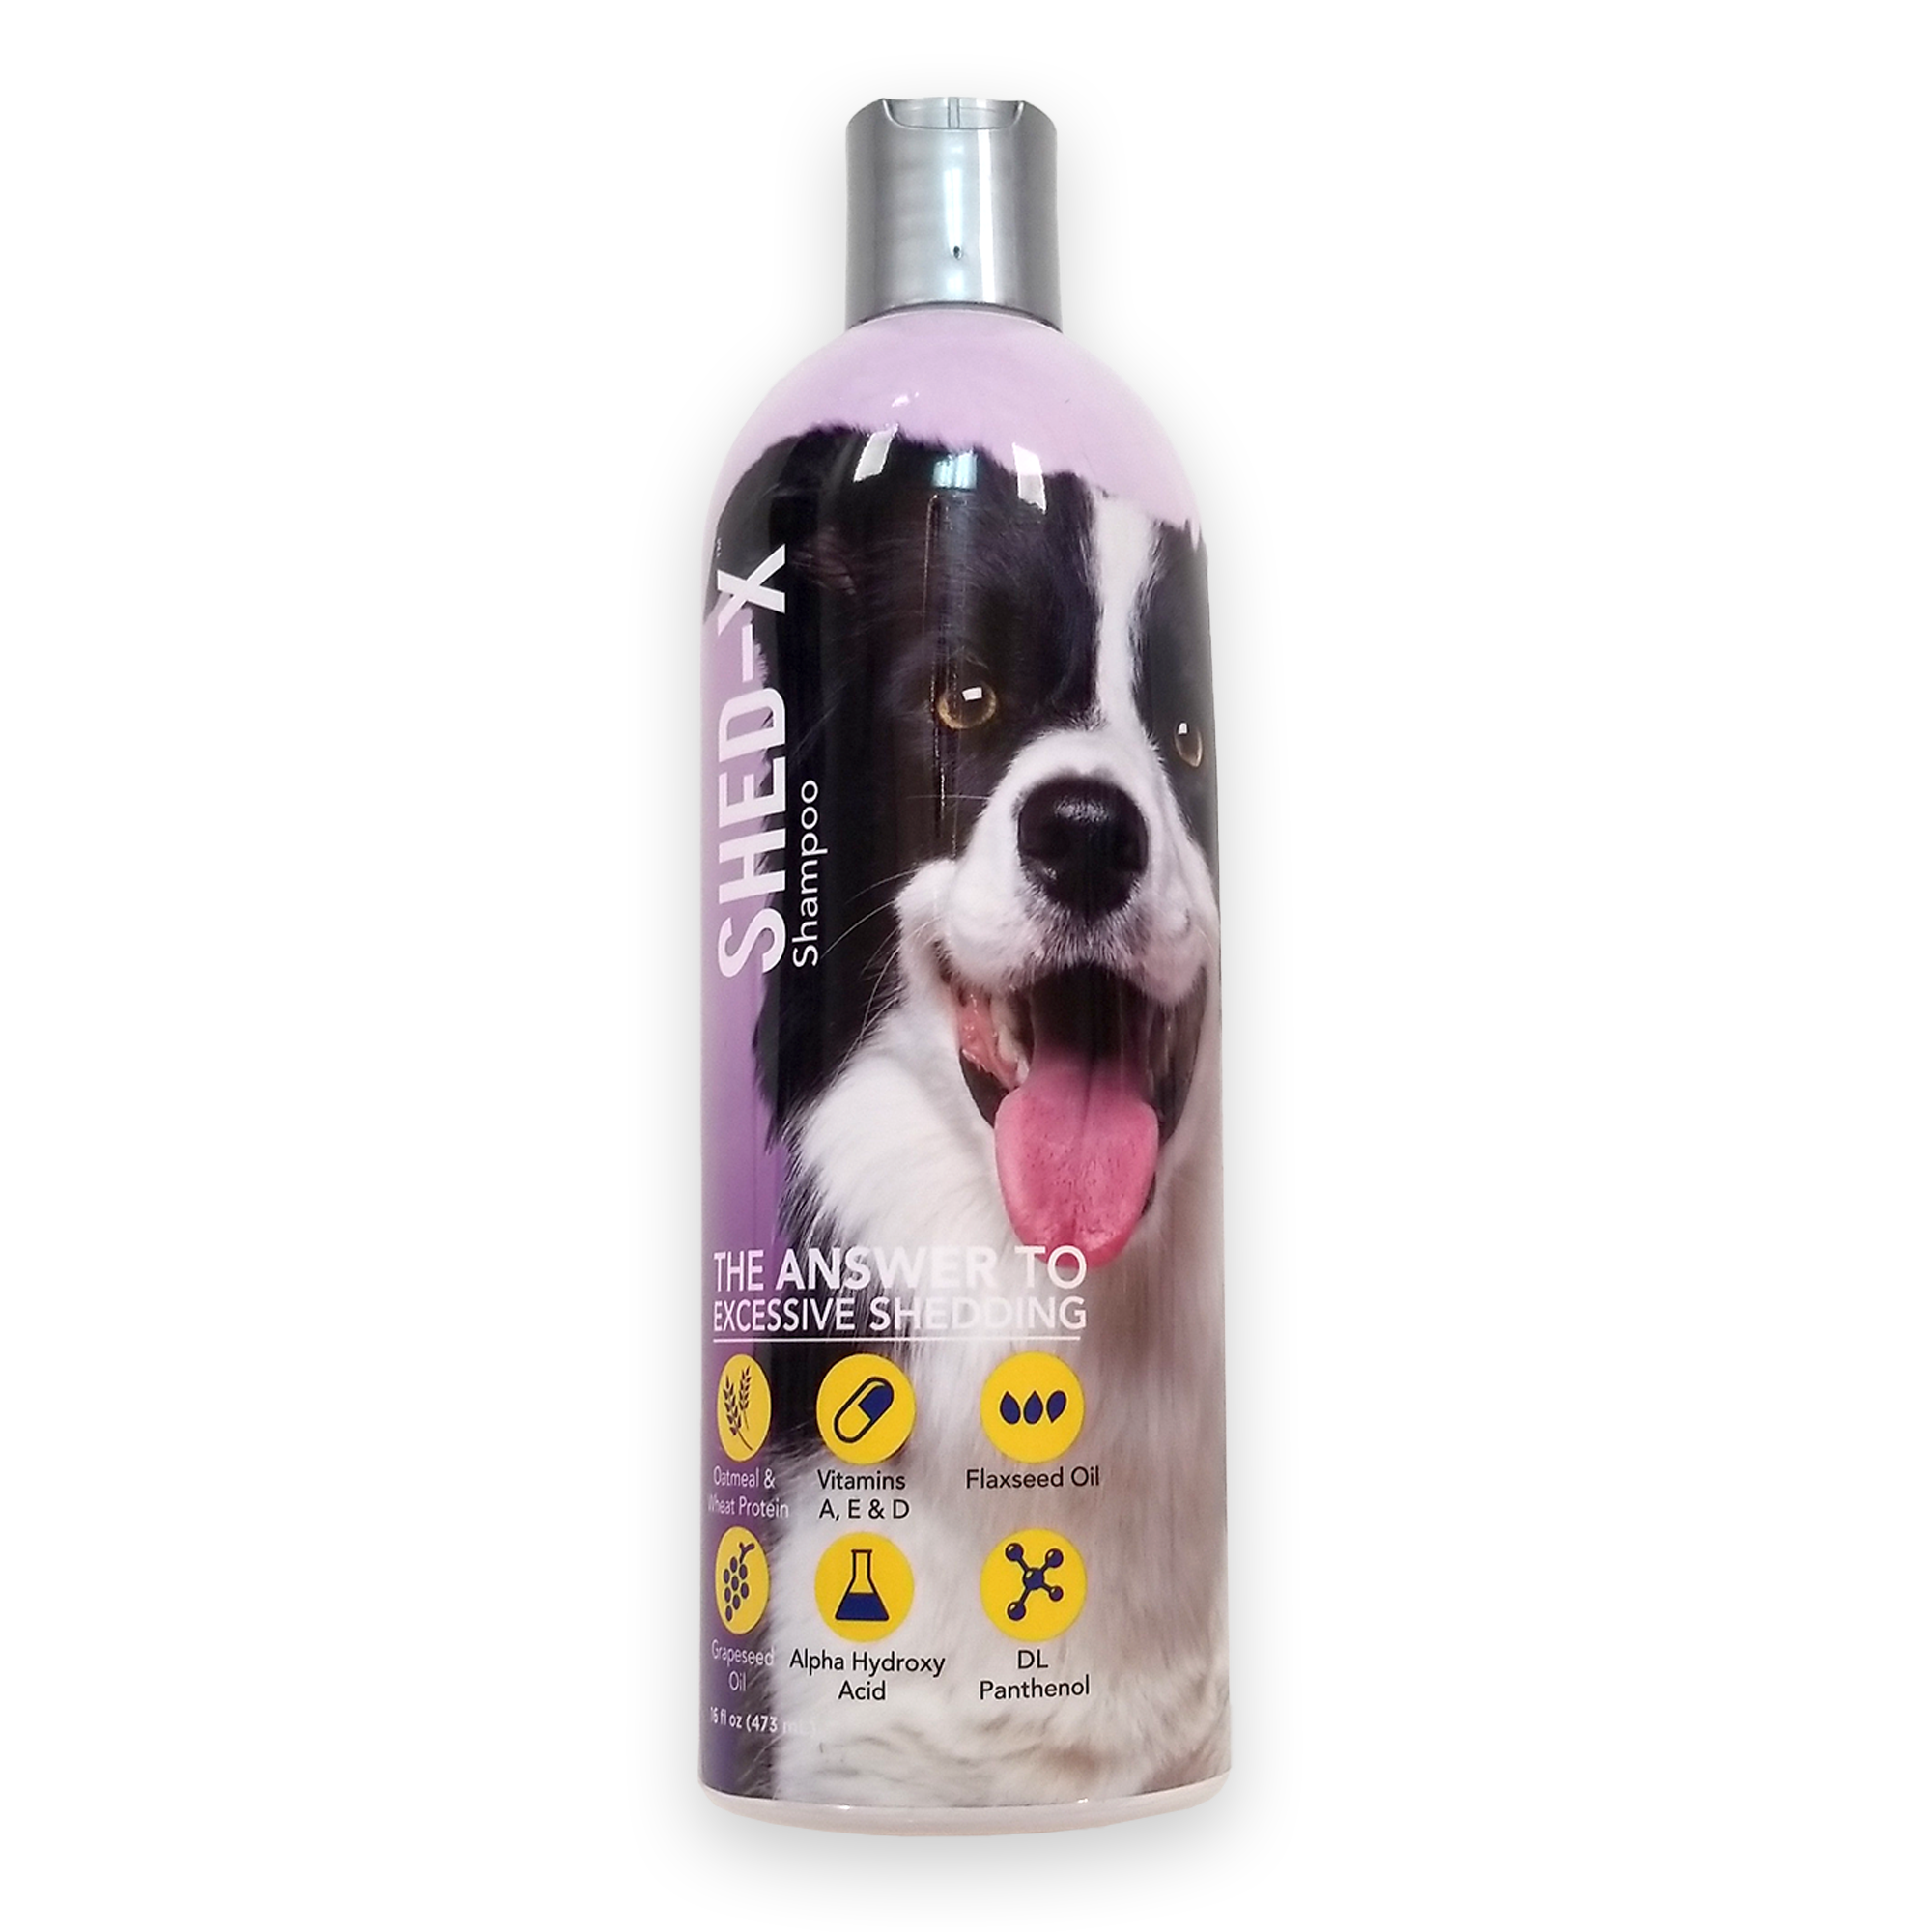 Shed-X For Excessive Shedding (473ml)